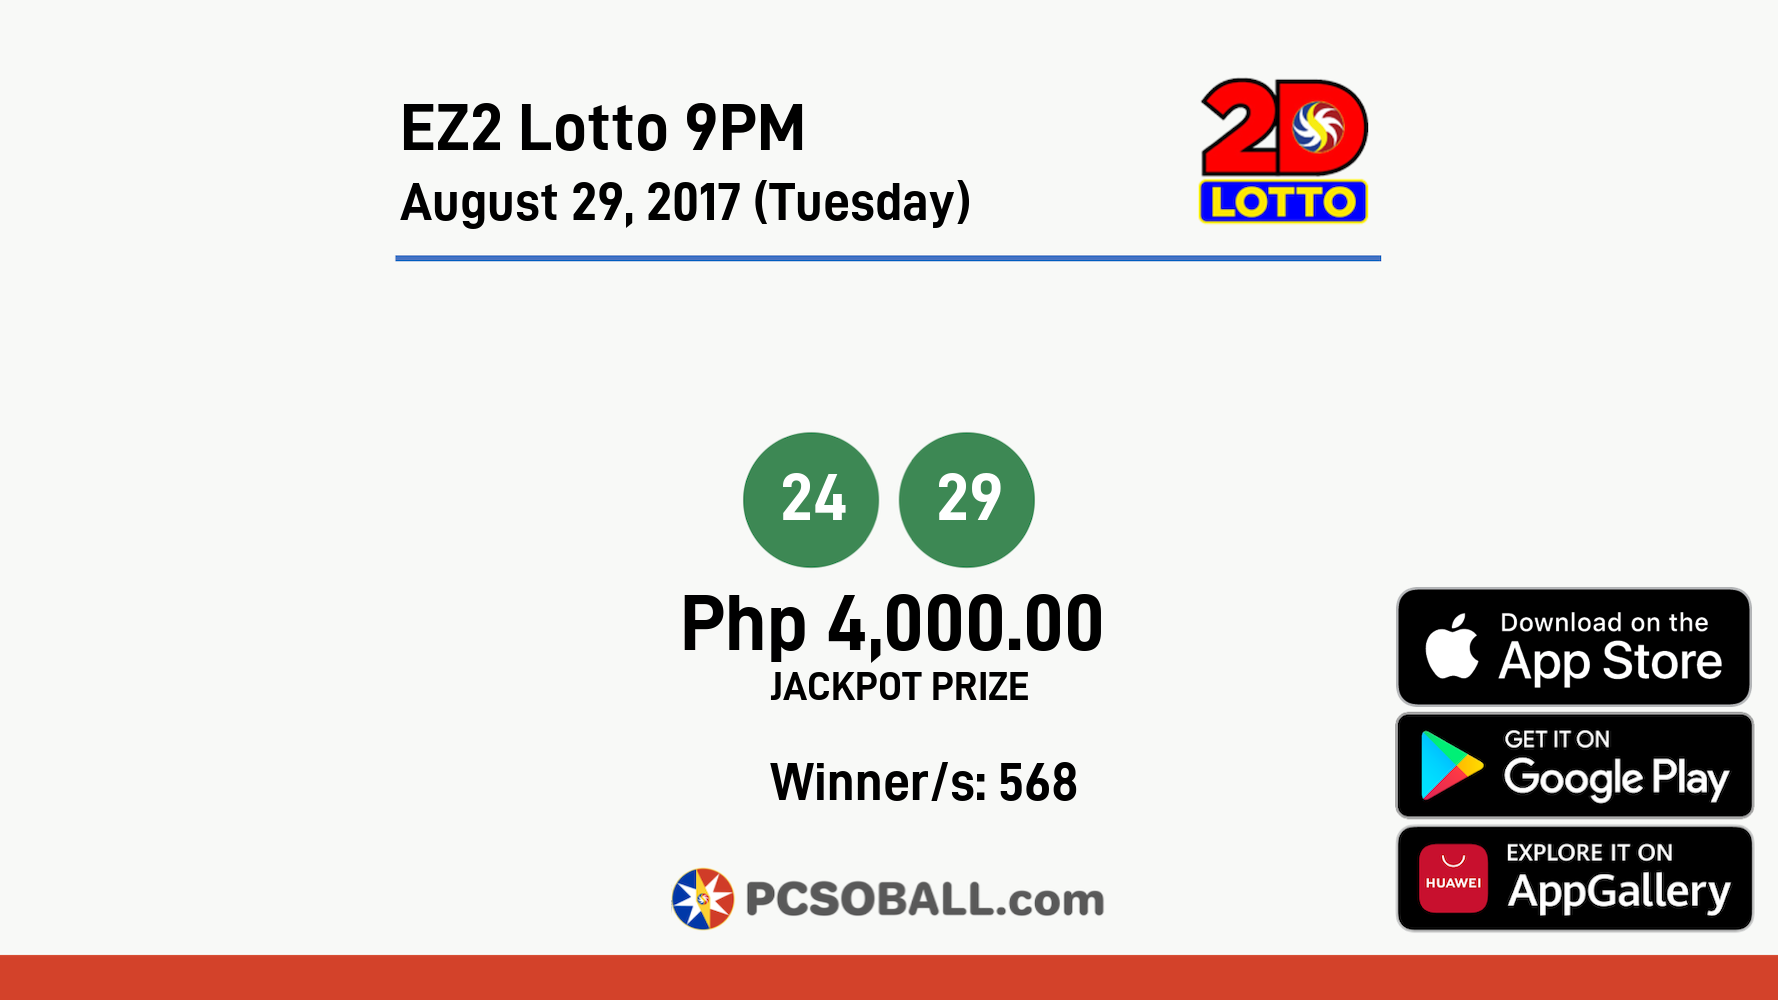 EZ2 Lotto 9PM August 29, 2017 (Tuesday) Result